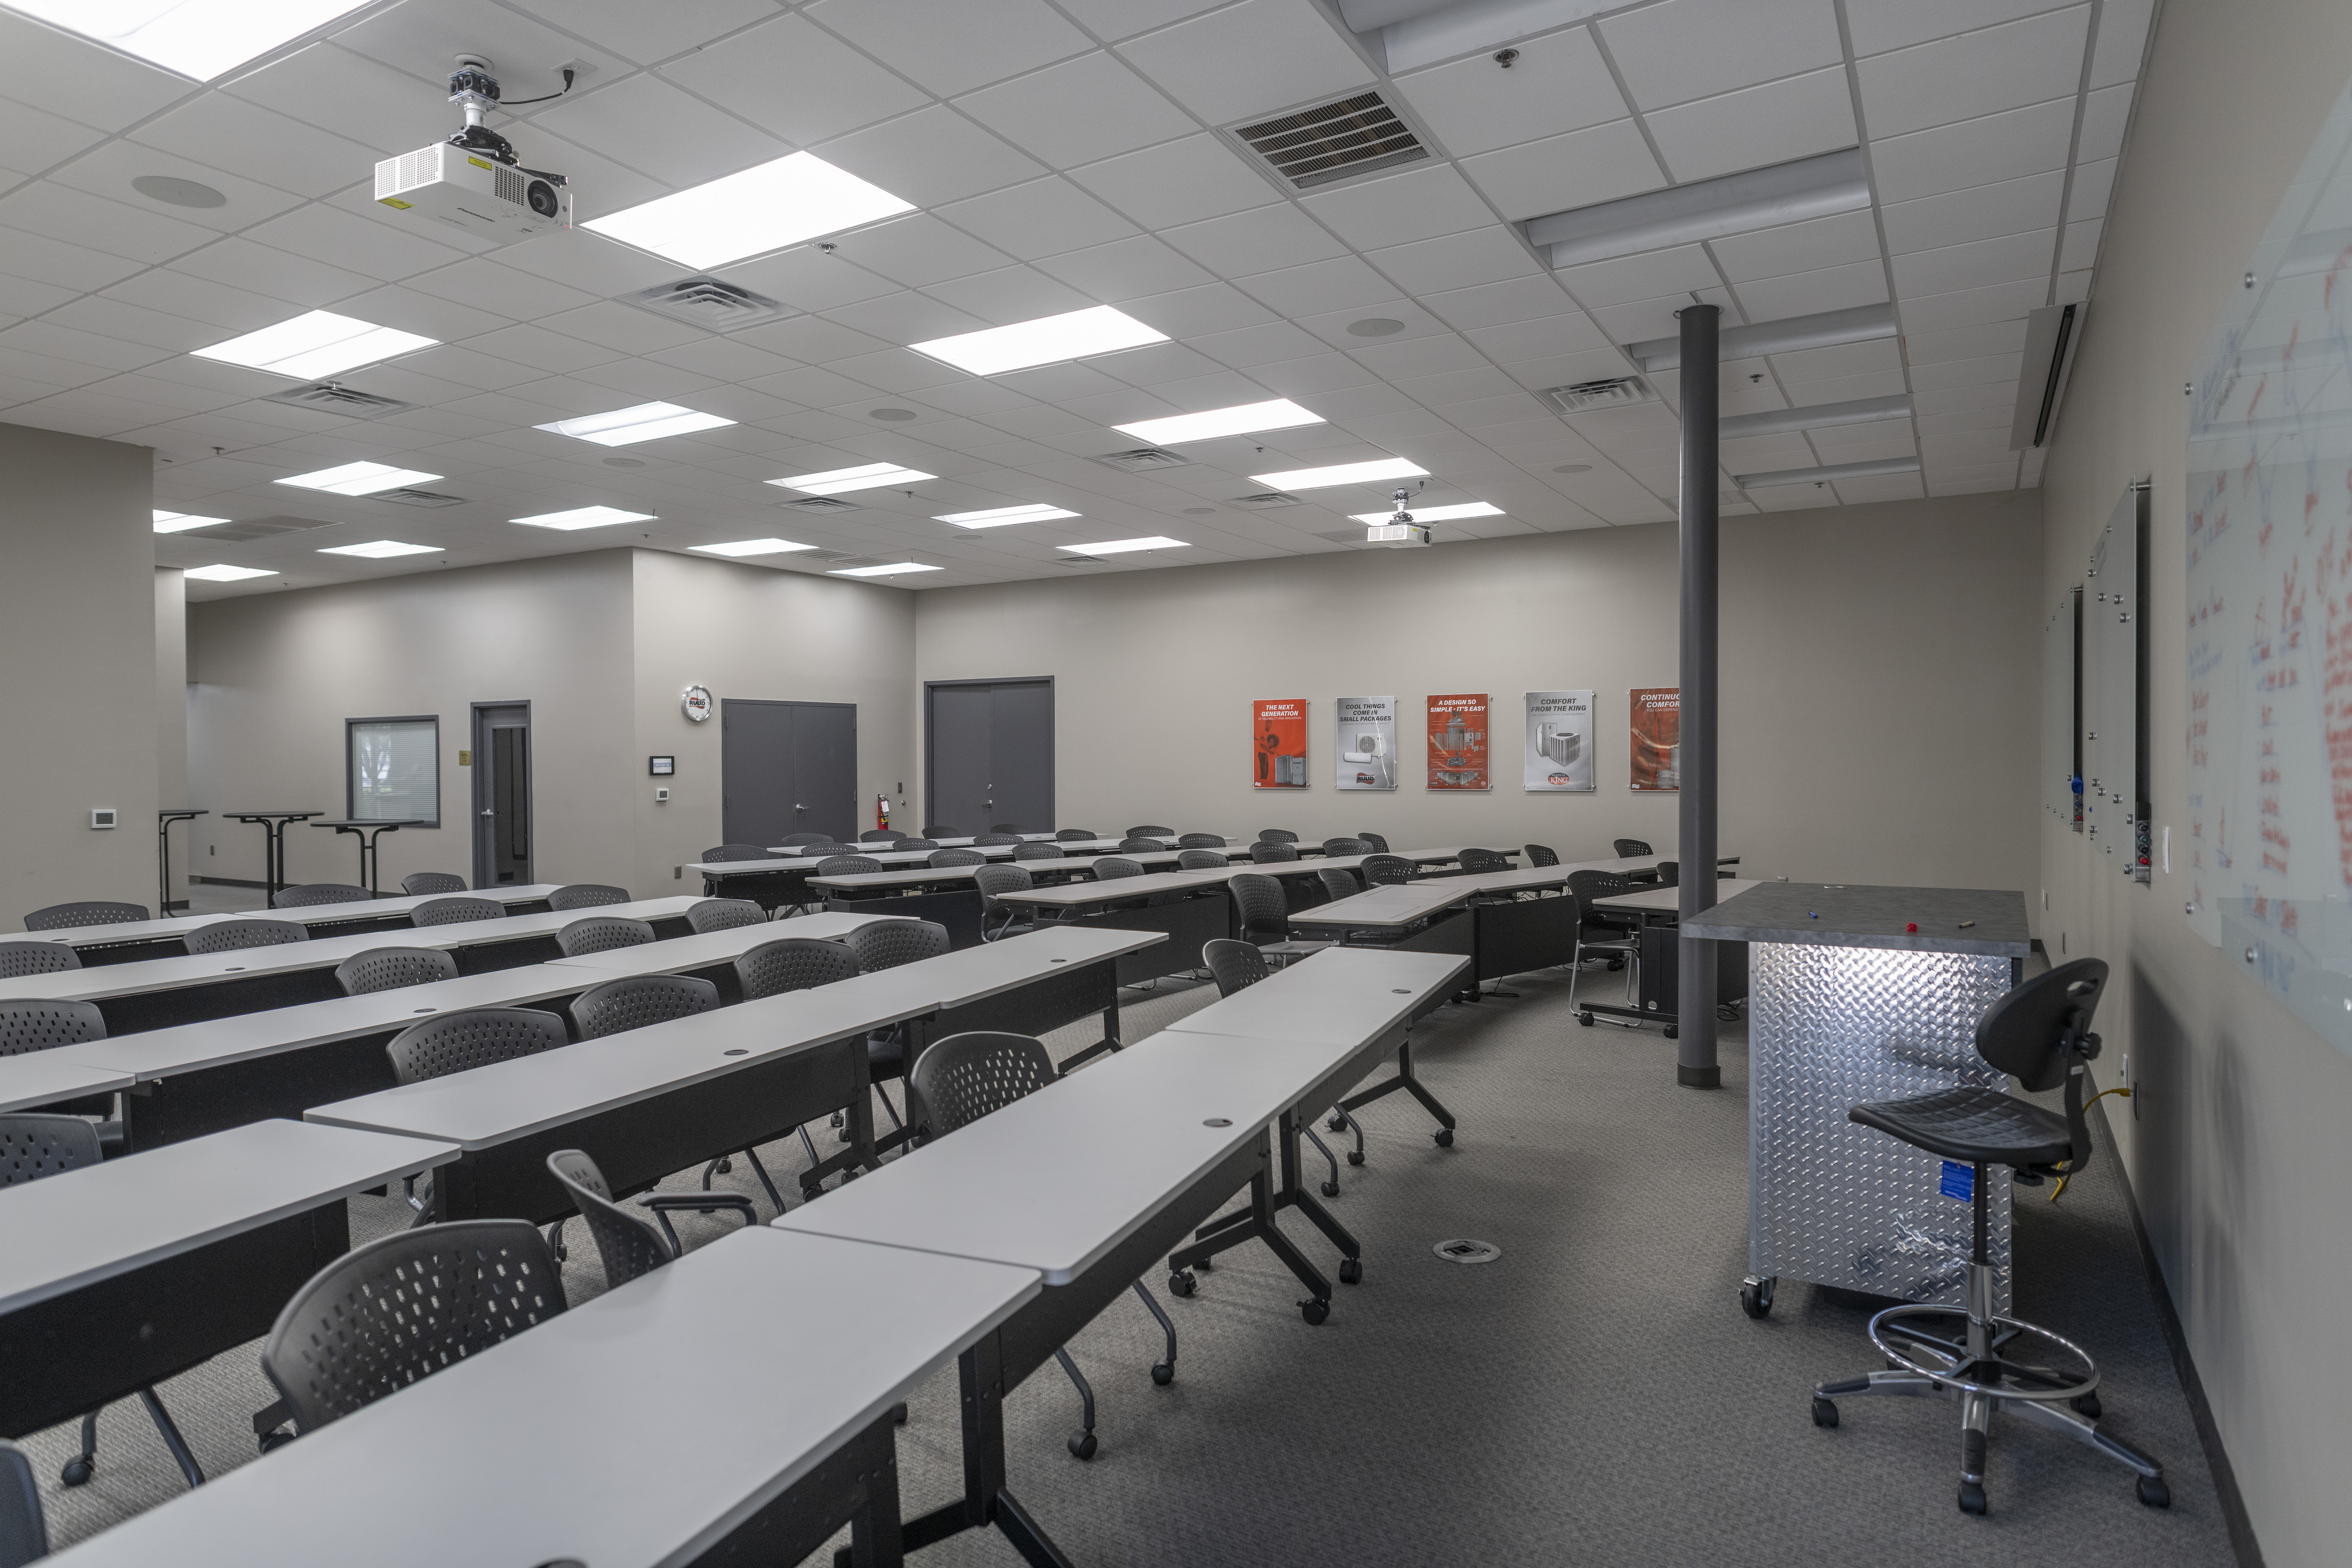 Overview of Training Room Rental